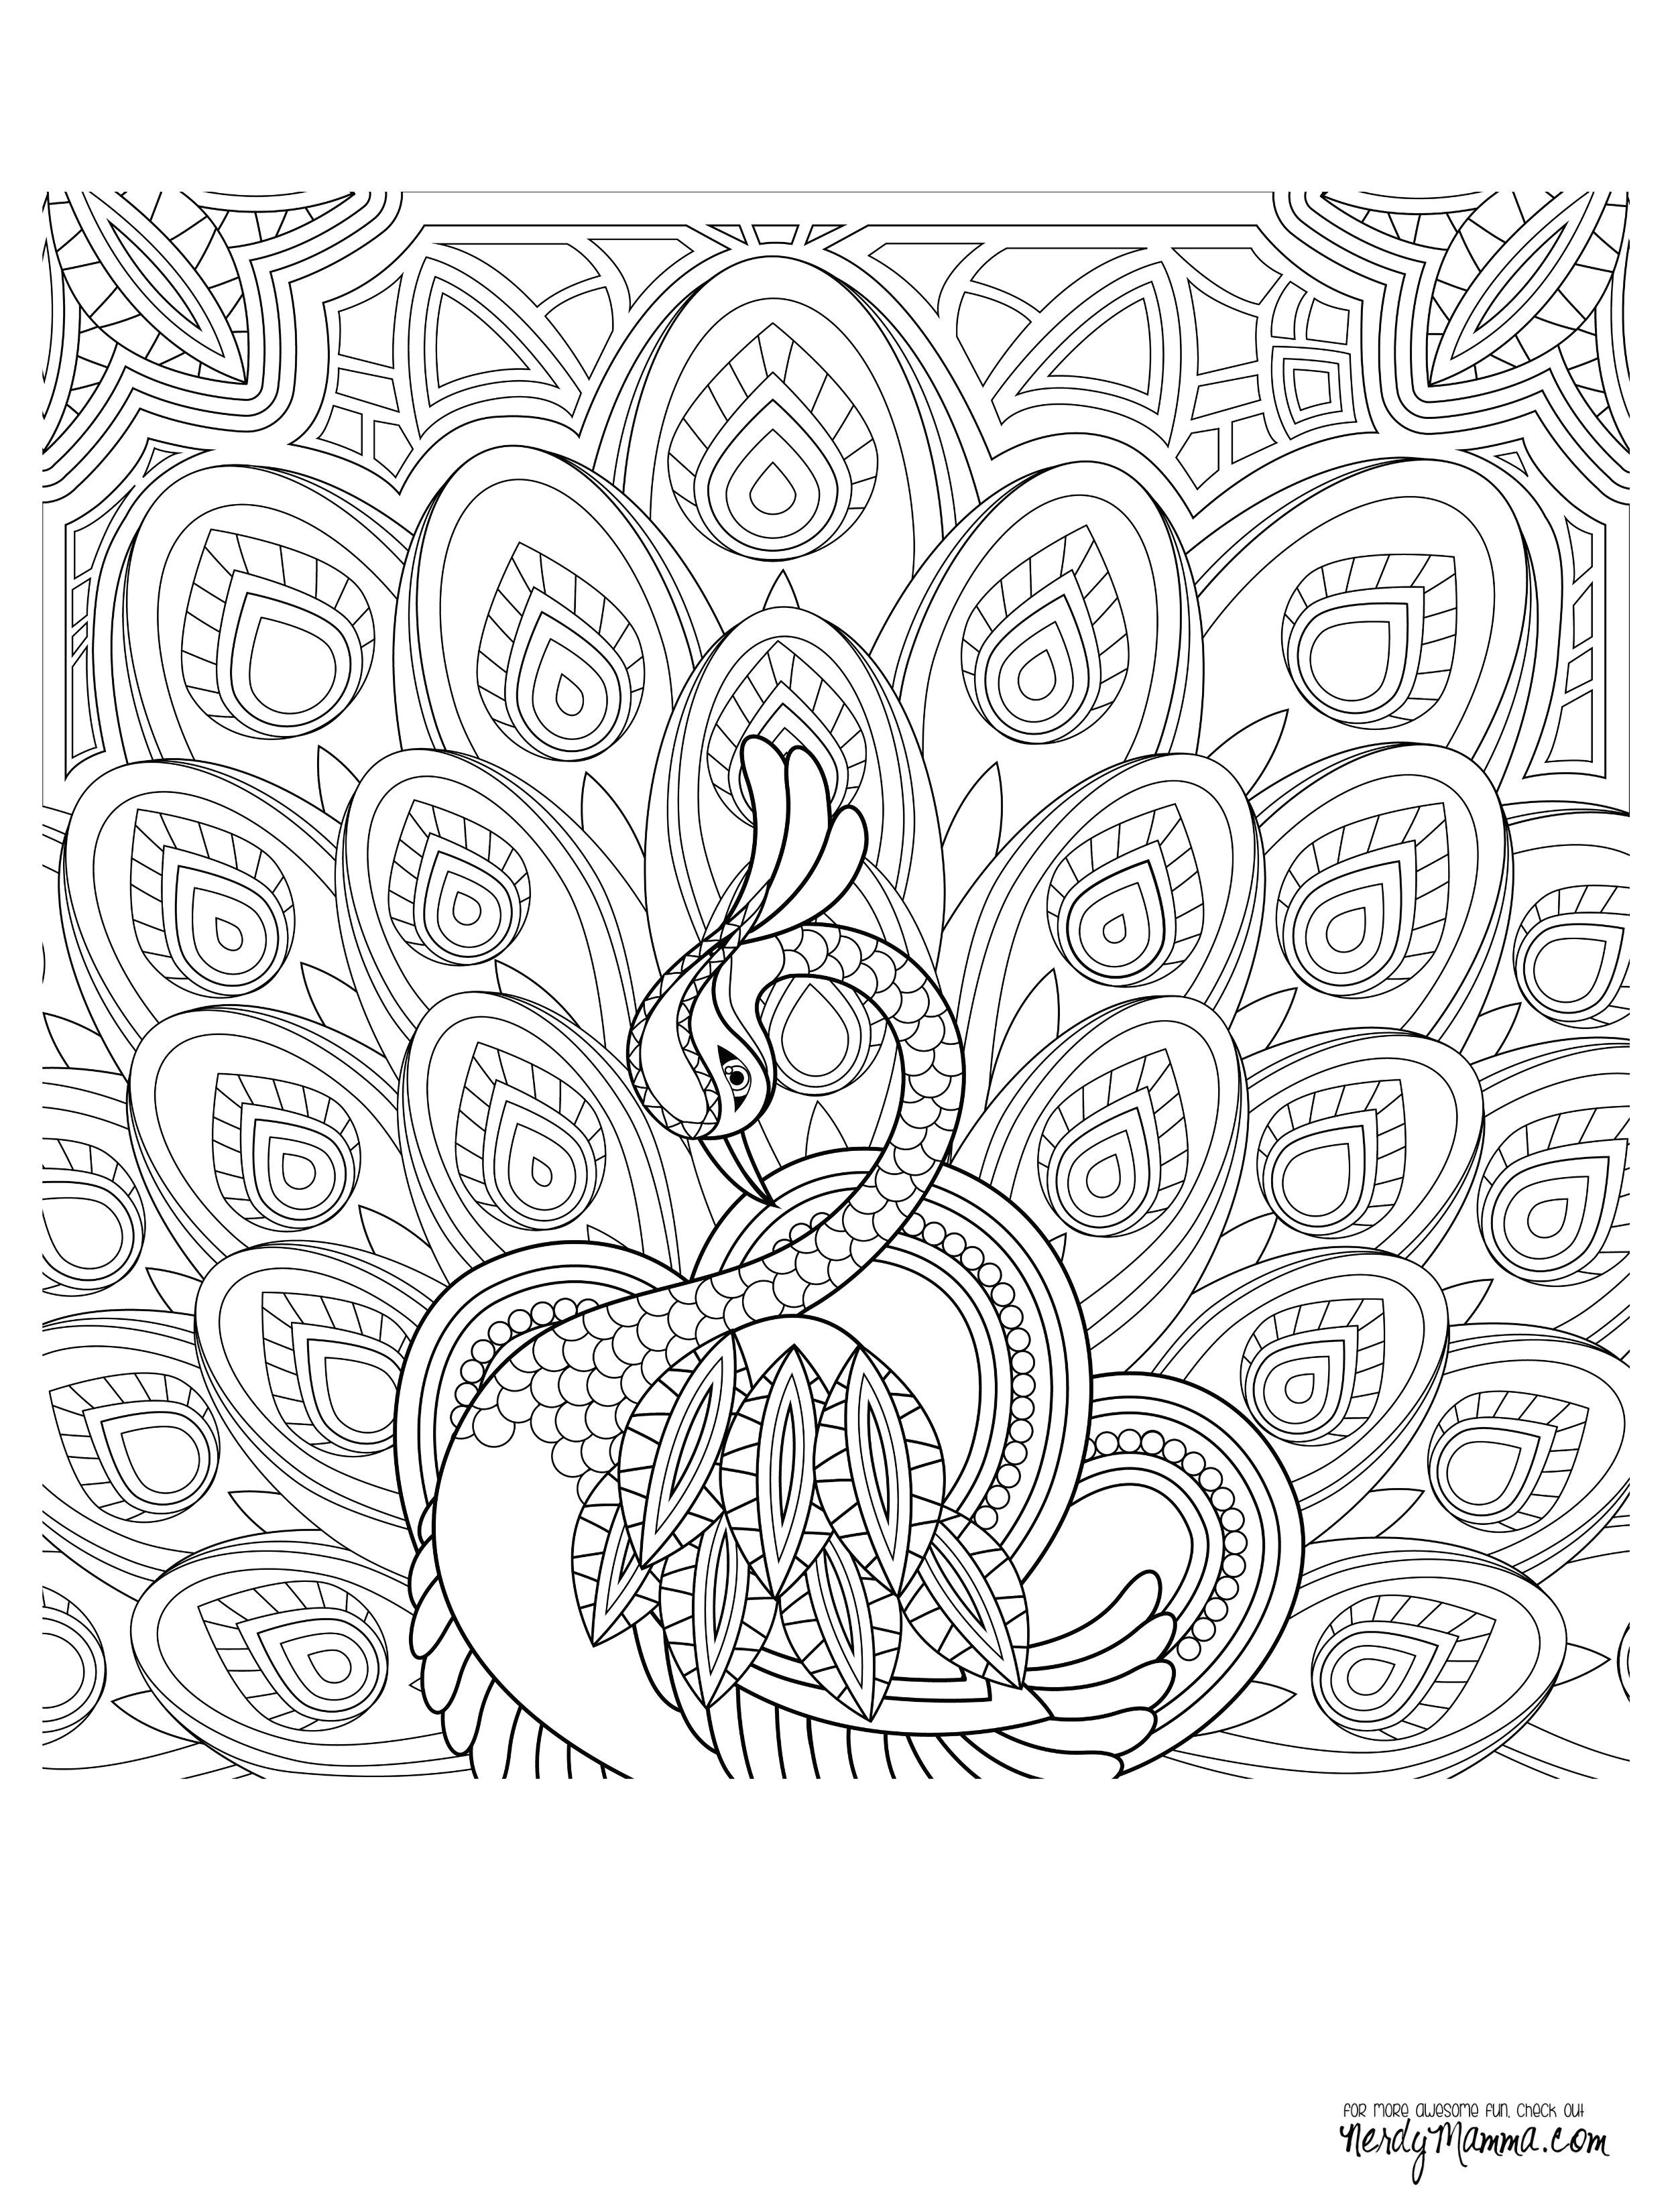 Drawing Ideas Peacock Peacock Feather Coloring Pages Colouring Adult Detailed Advanced